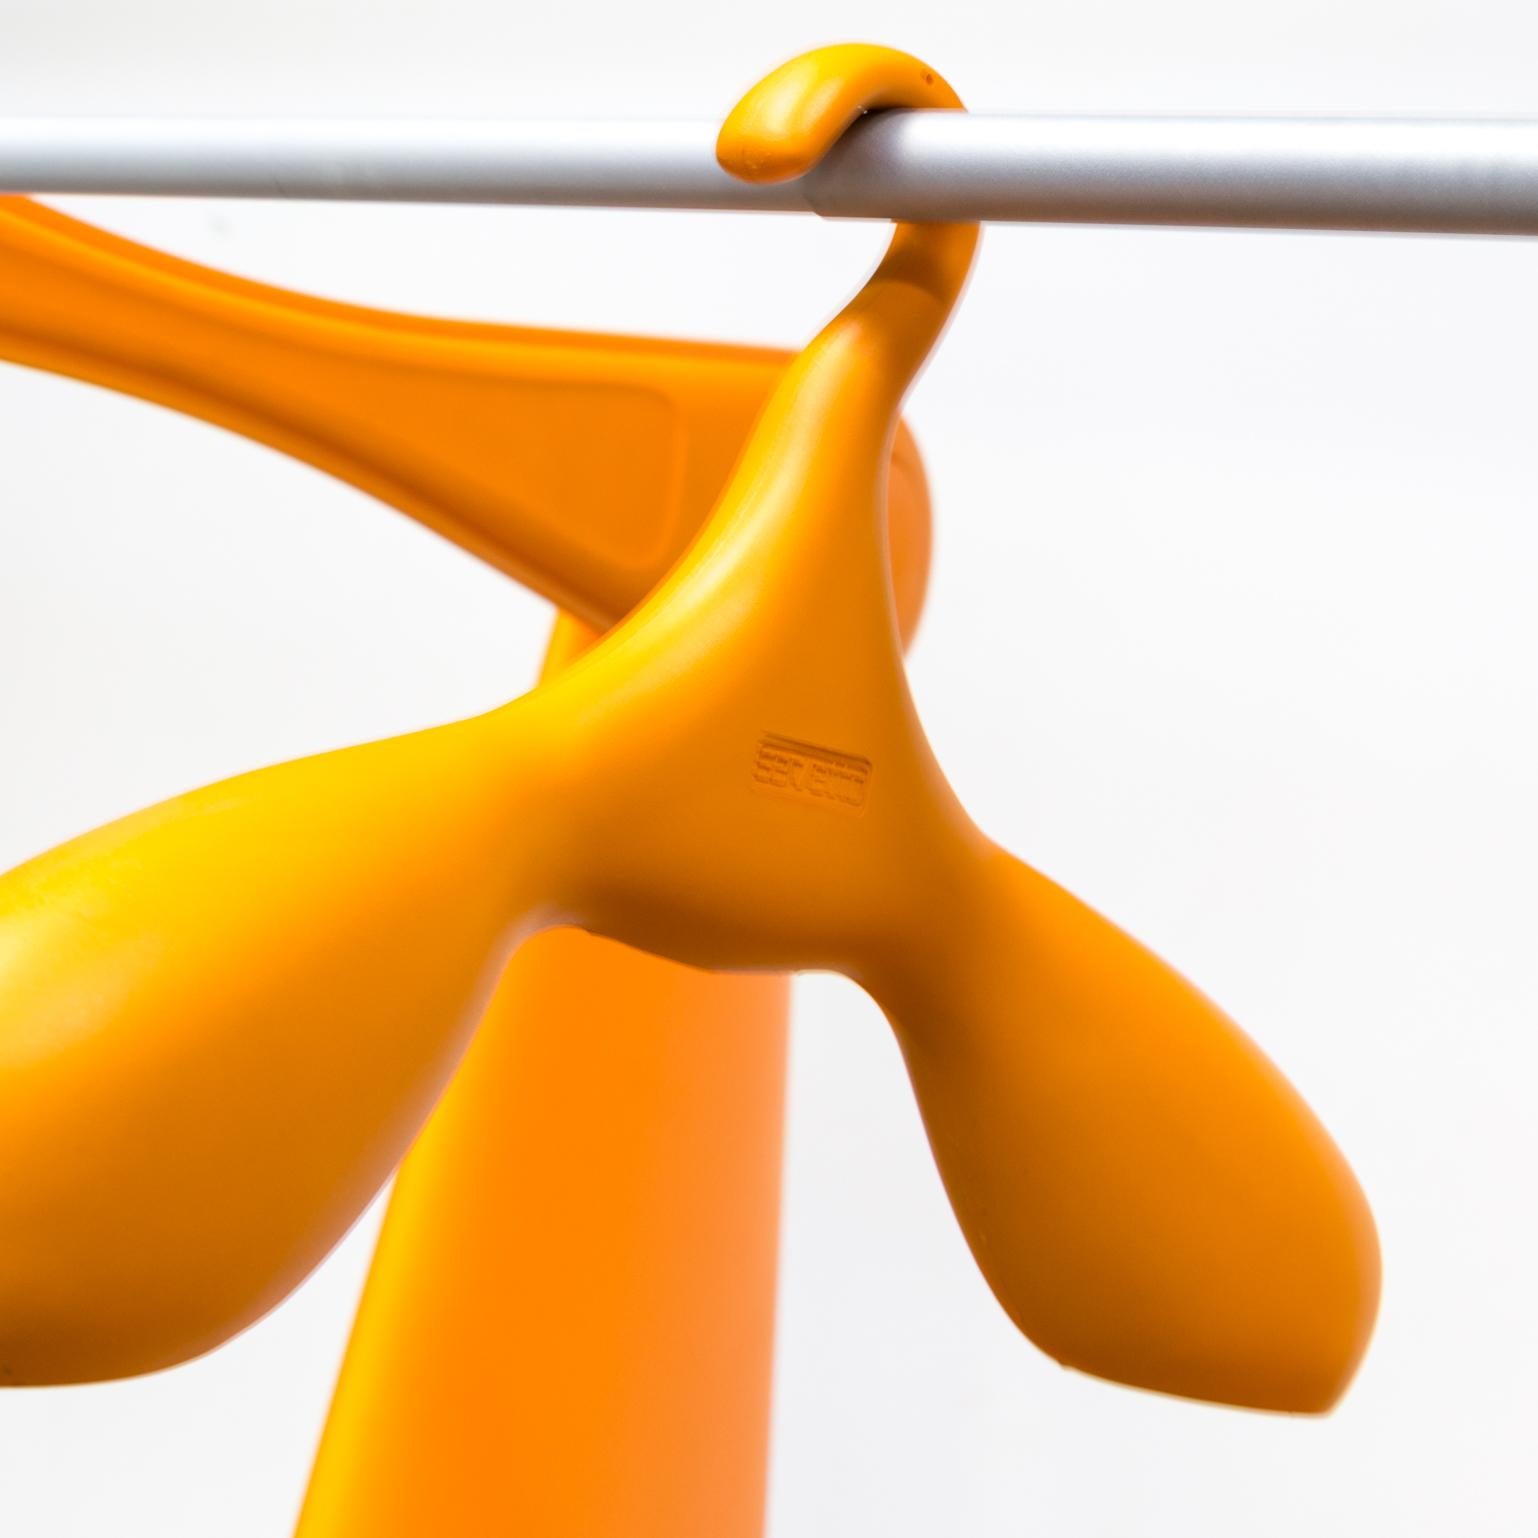 E. Terragni Coat Stand ‘Atelier’ & Servetto Lift and Dino Clothes Hangers im Angebot 8